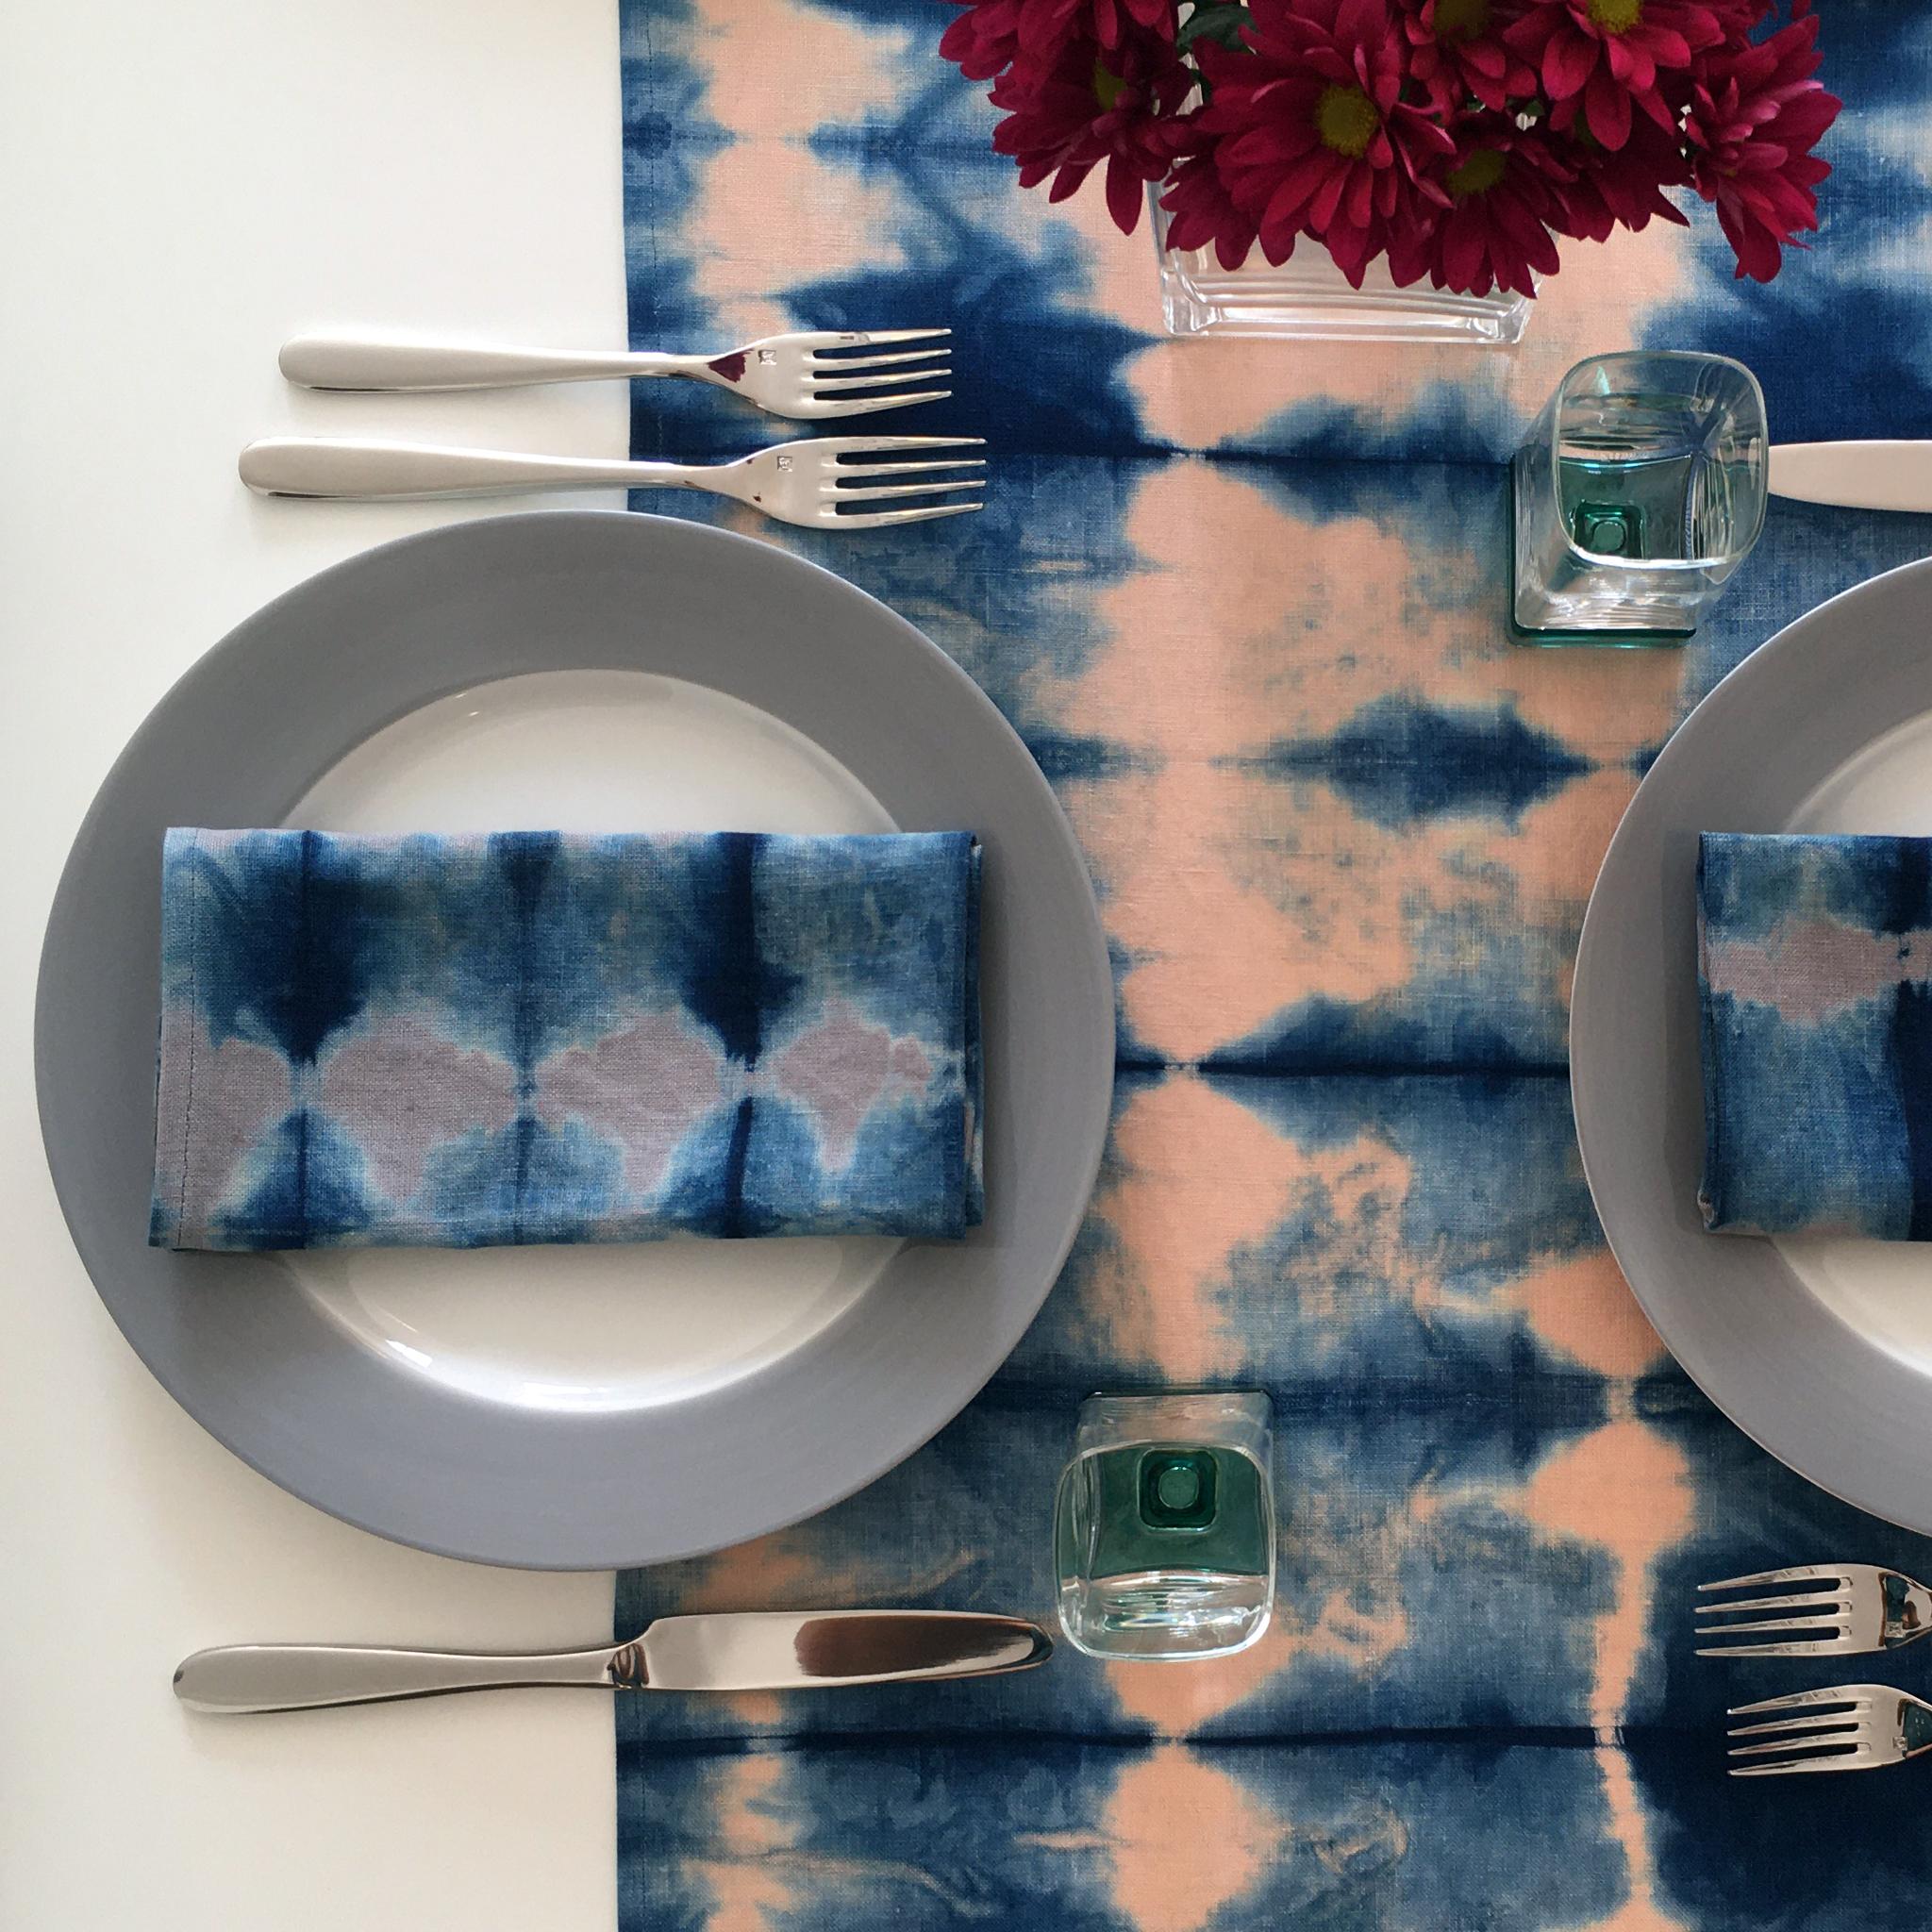 Rose linen table runner dyed with indigo in Pleat pattern. Hand-dyed and sewn in New York City. Runner measures approximately 18 x 72 inches. Each linen runner is hand dyed and one of a kind. 

Each linen panel is cut and folded by hand, in the